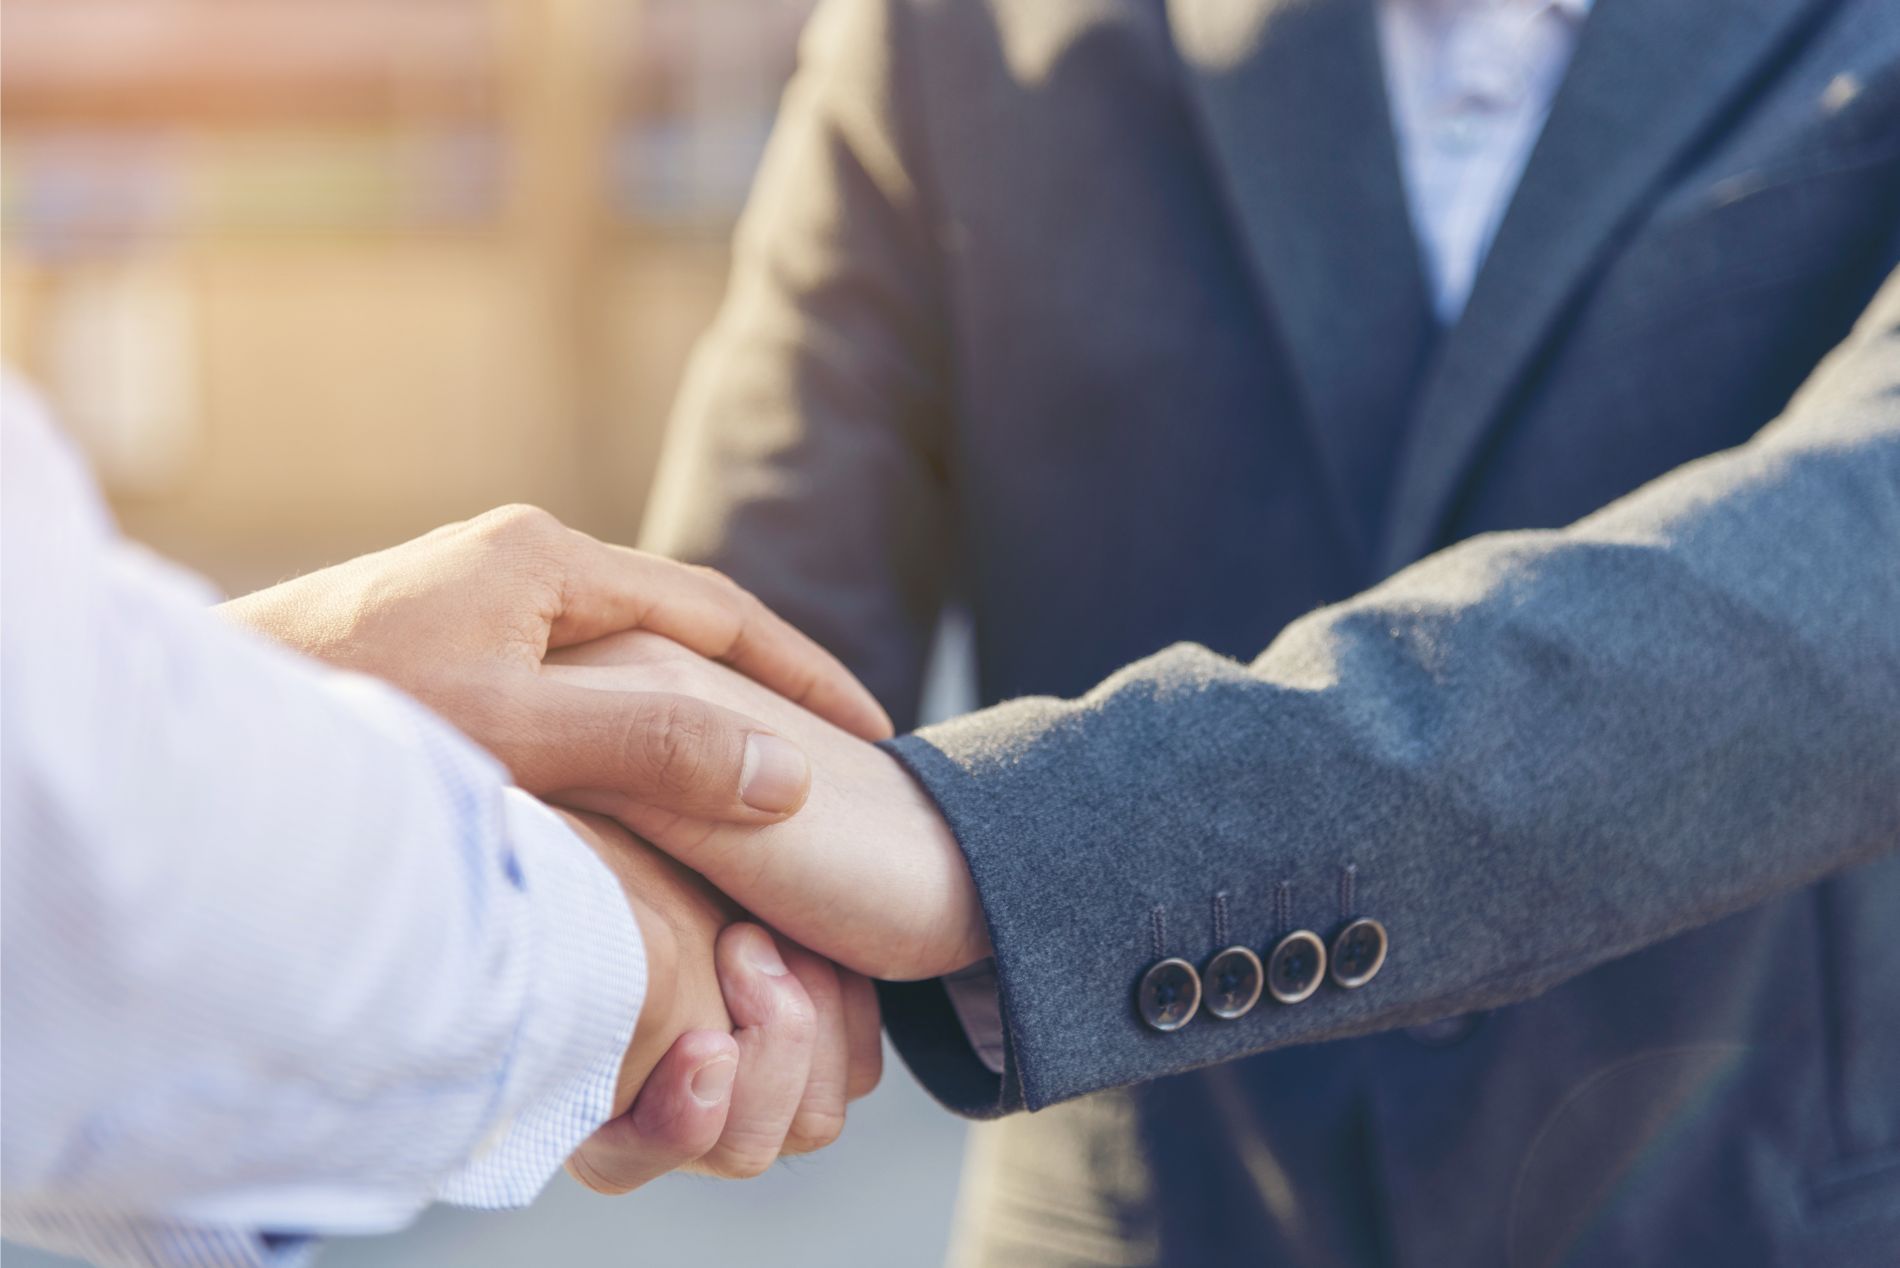 A client warmly shaking hands with an attorney